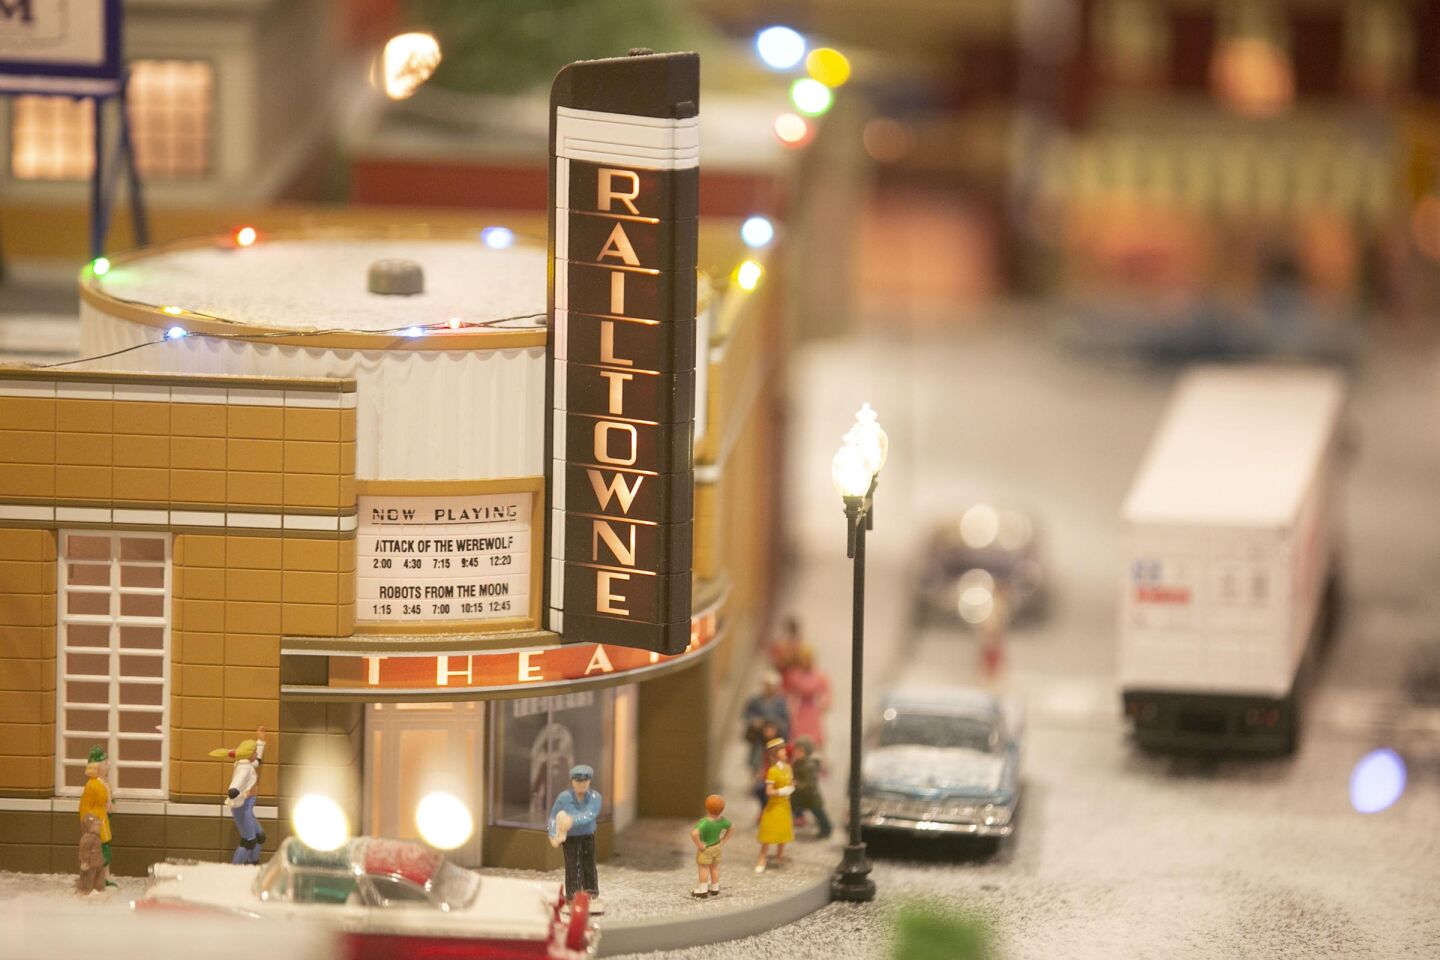 David Lizerbram and his wife Mana Monzavi took over the Old Town Model Railroad Depot, which was in danger of closing. The extensive train layout and its detailed and sometimes humorous dioramas was photographed on Friday, Dec. 13, 2019, at its Old Town, San Diego location. The Railtowne movie theater.